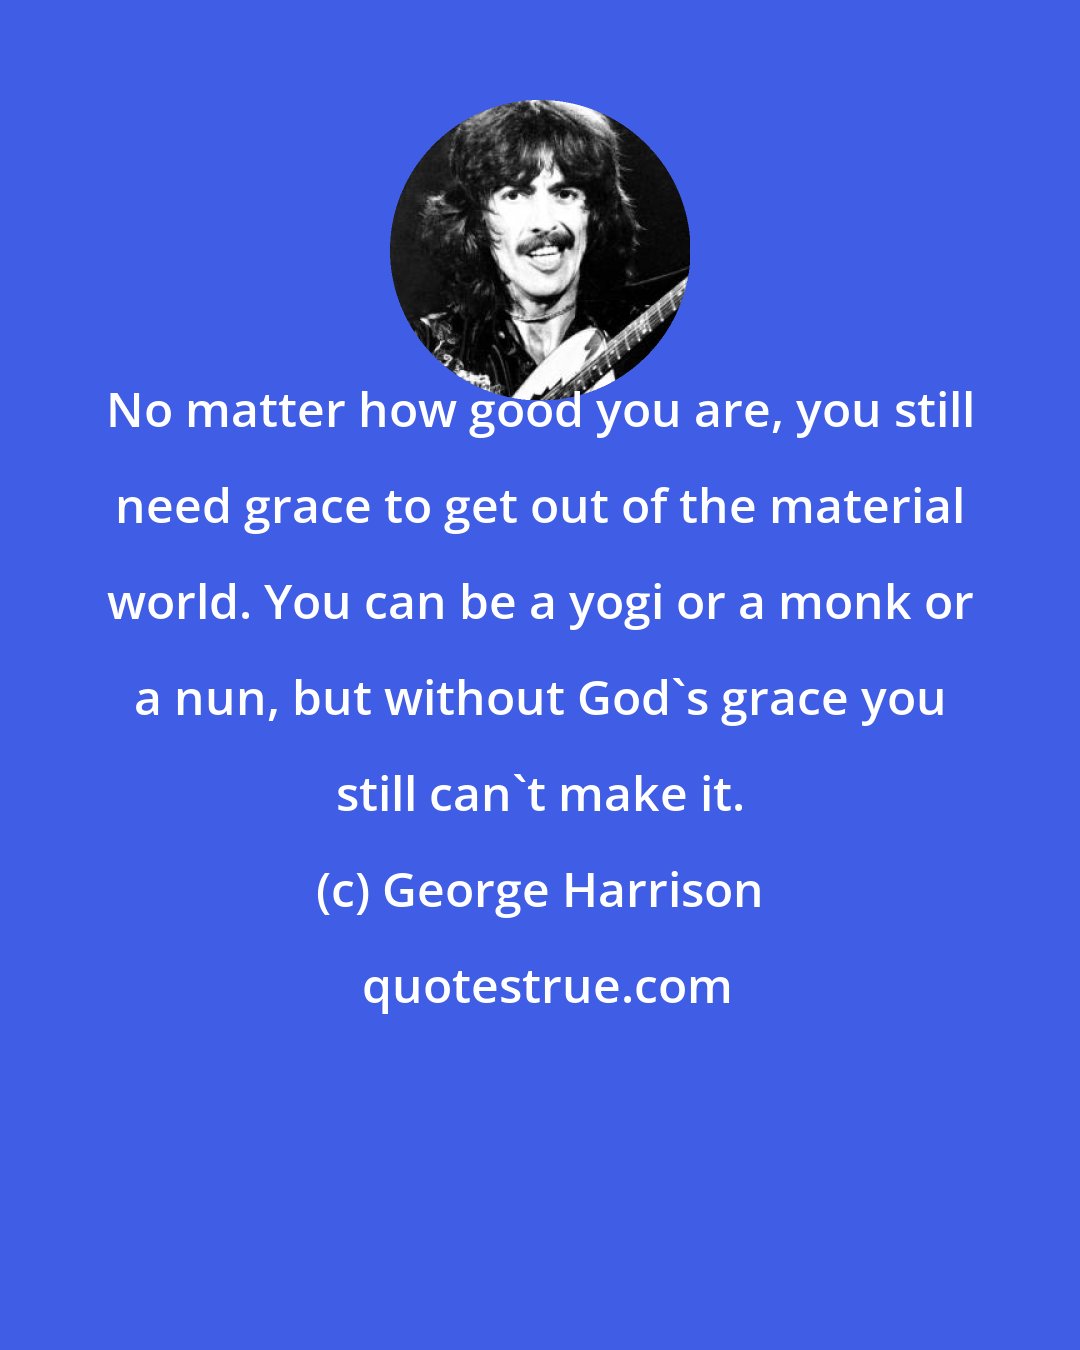 George Harrison: No matter how good you are, you still need grace to get out of the material world. You can be a yogi or a monk or a nun, but without God's grace you still can't make it.